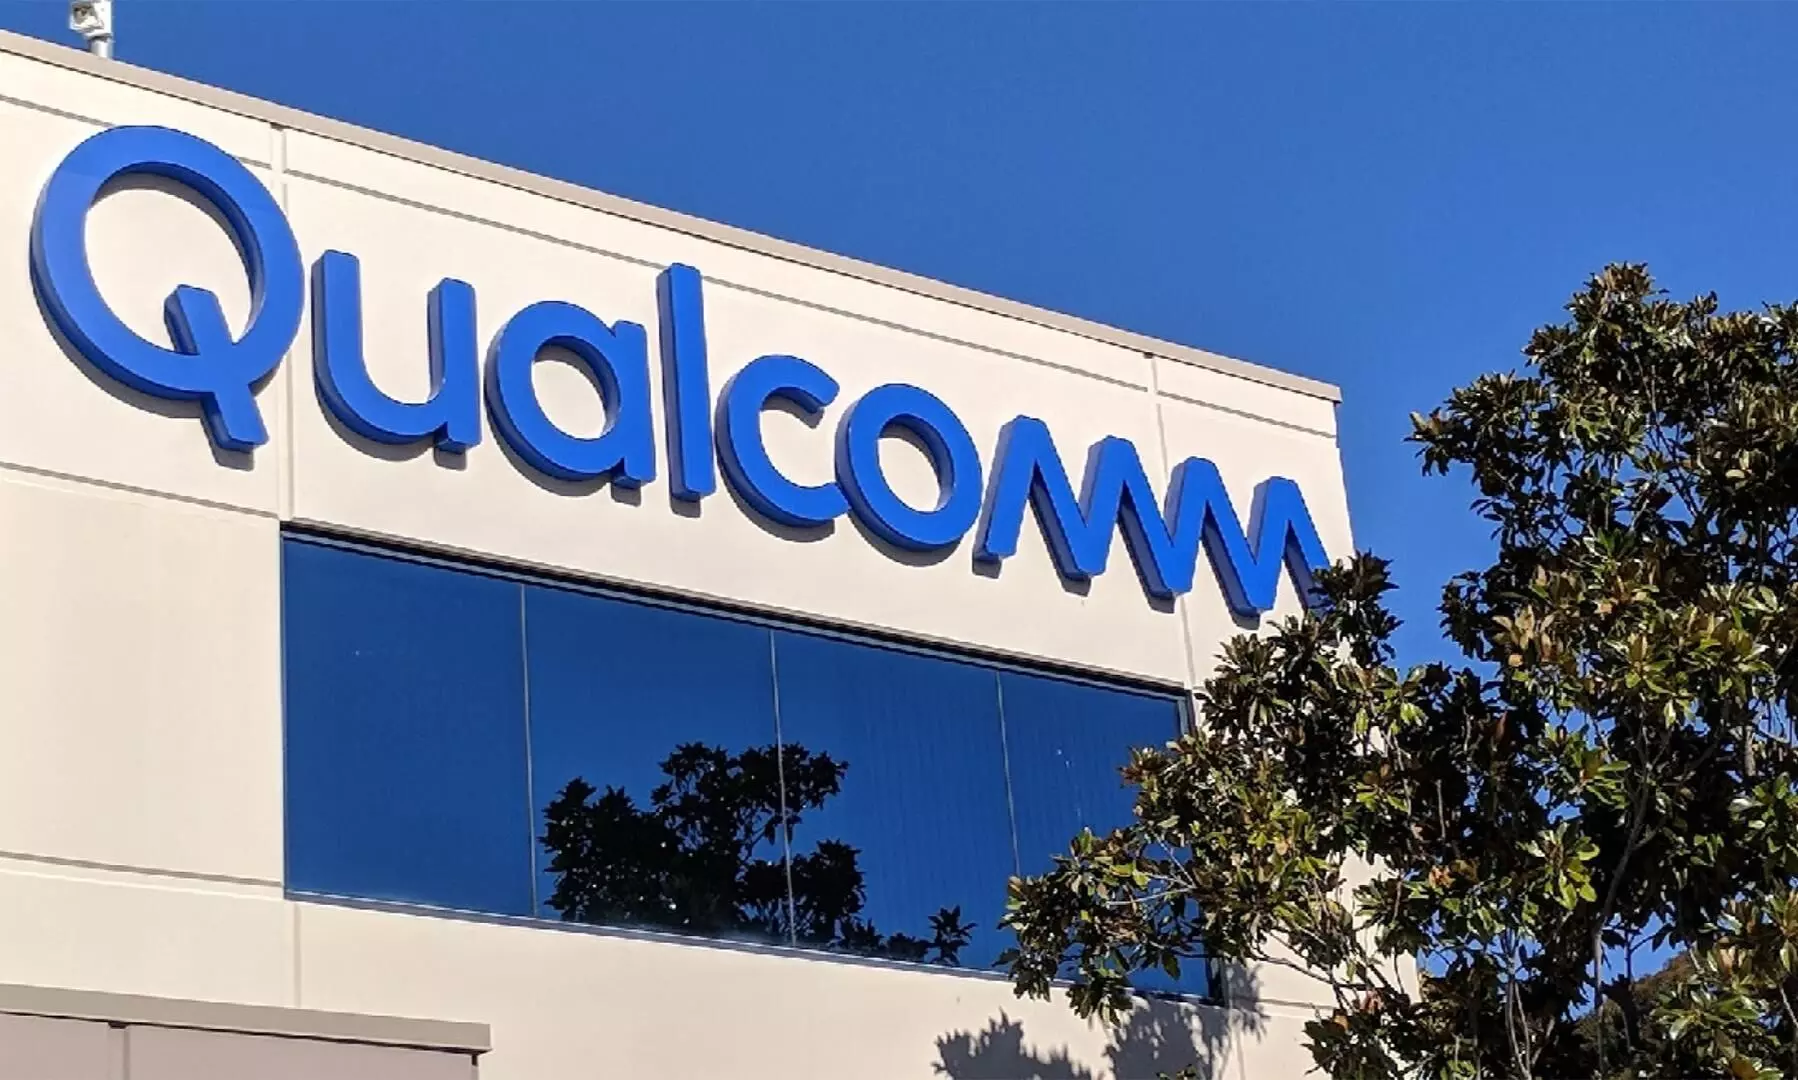 Global Chipmaker Qualcomm announces Snapdragon 750G chip with 5G connectivity